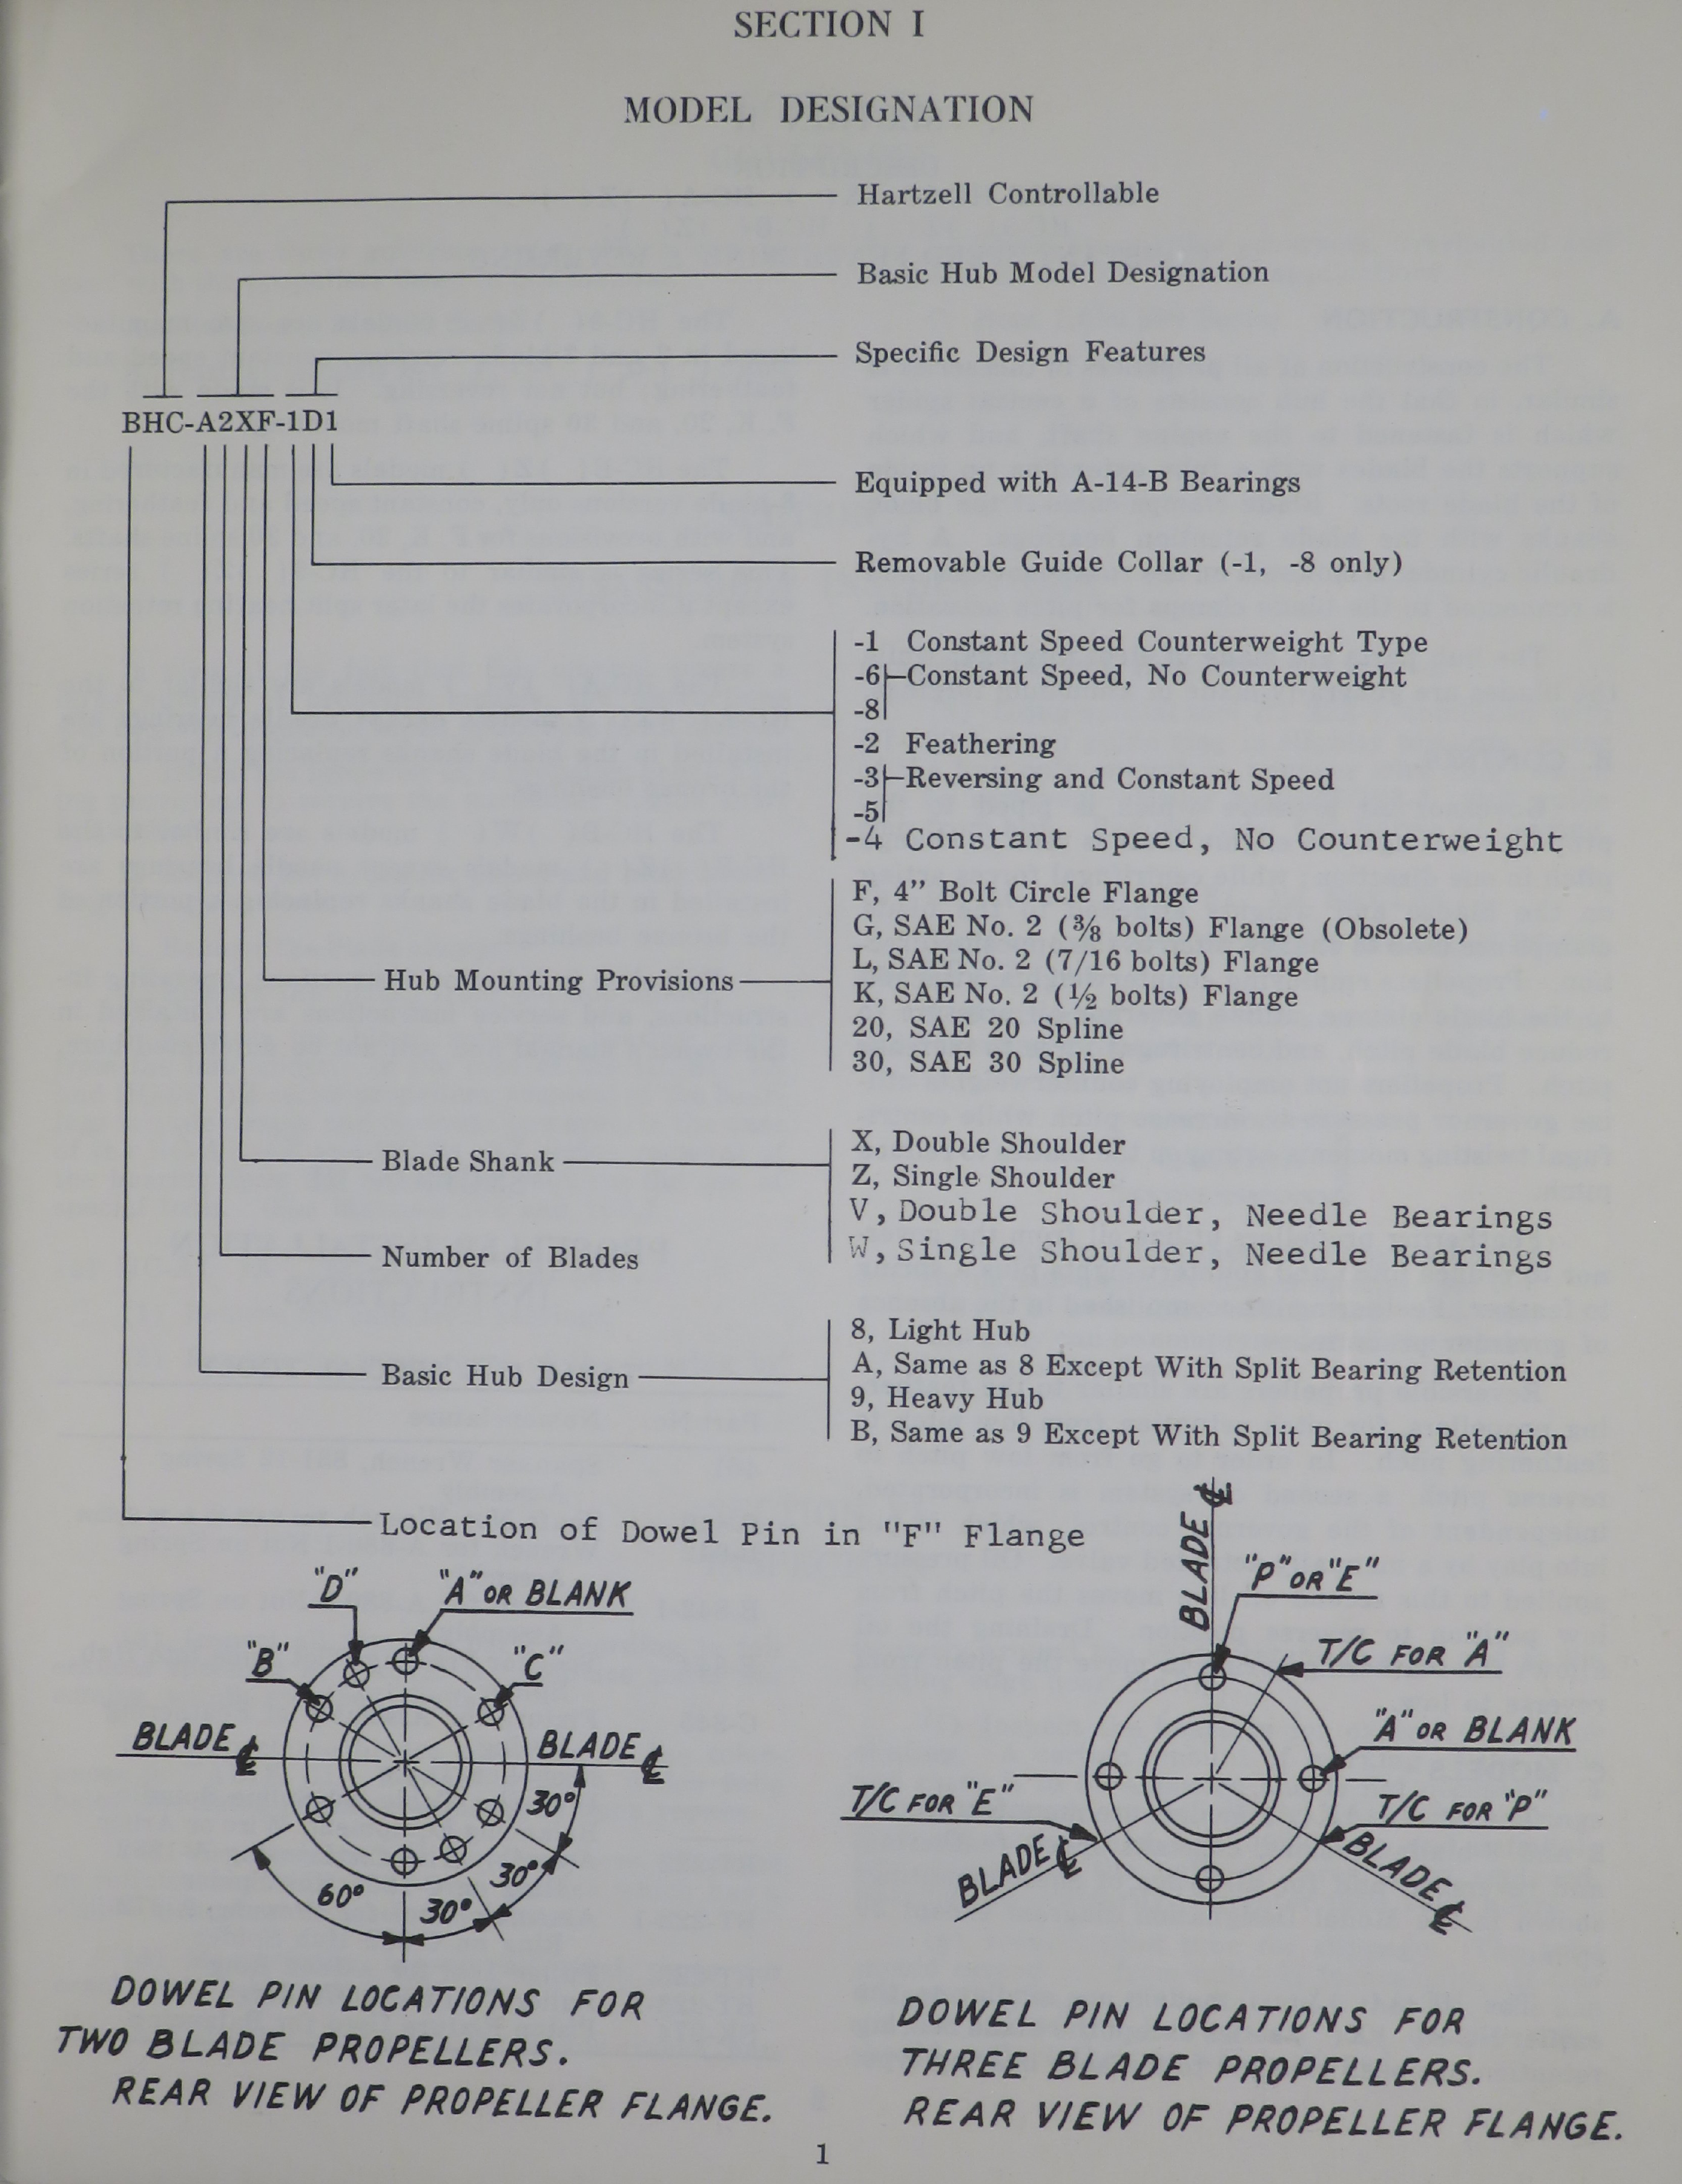 Sample page 5 from AirCorps Library document: Overhaul Instructions for Constant Speed, Feathering and Reversing Hartzell Propellers